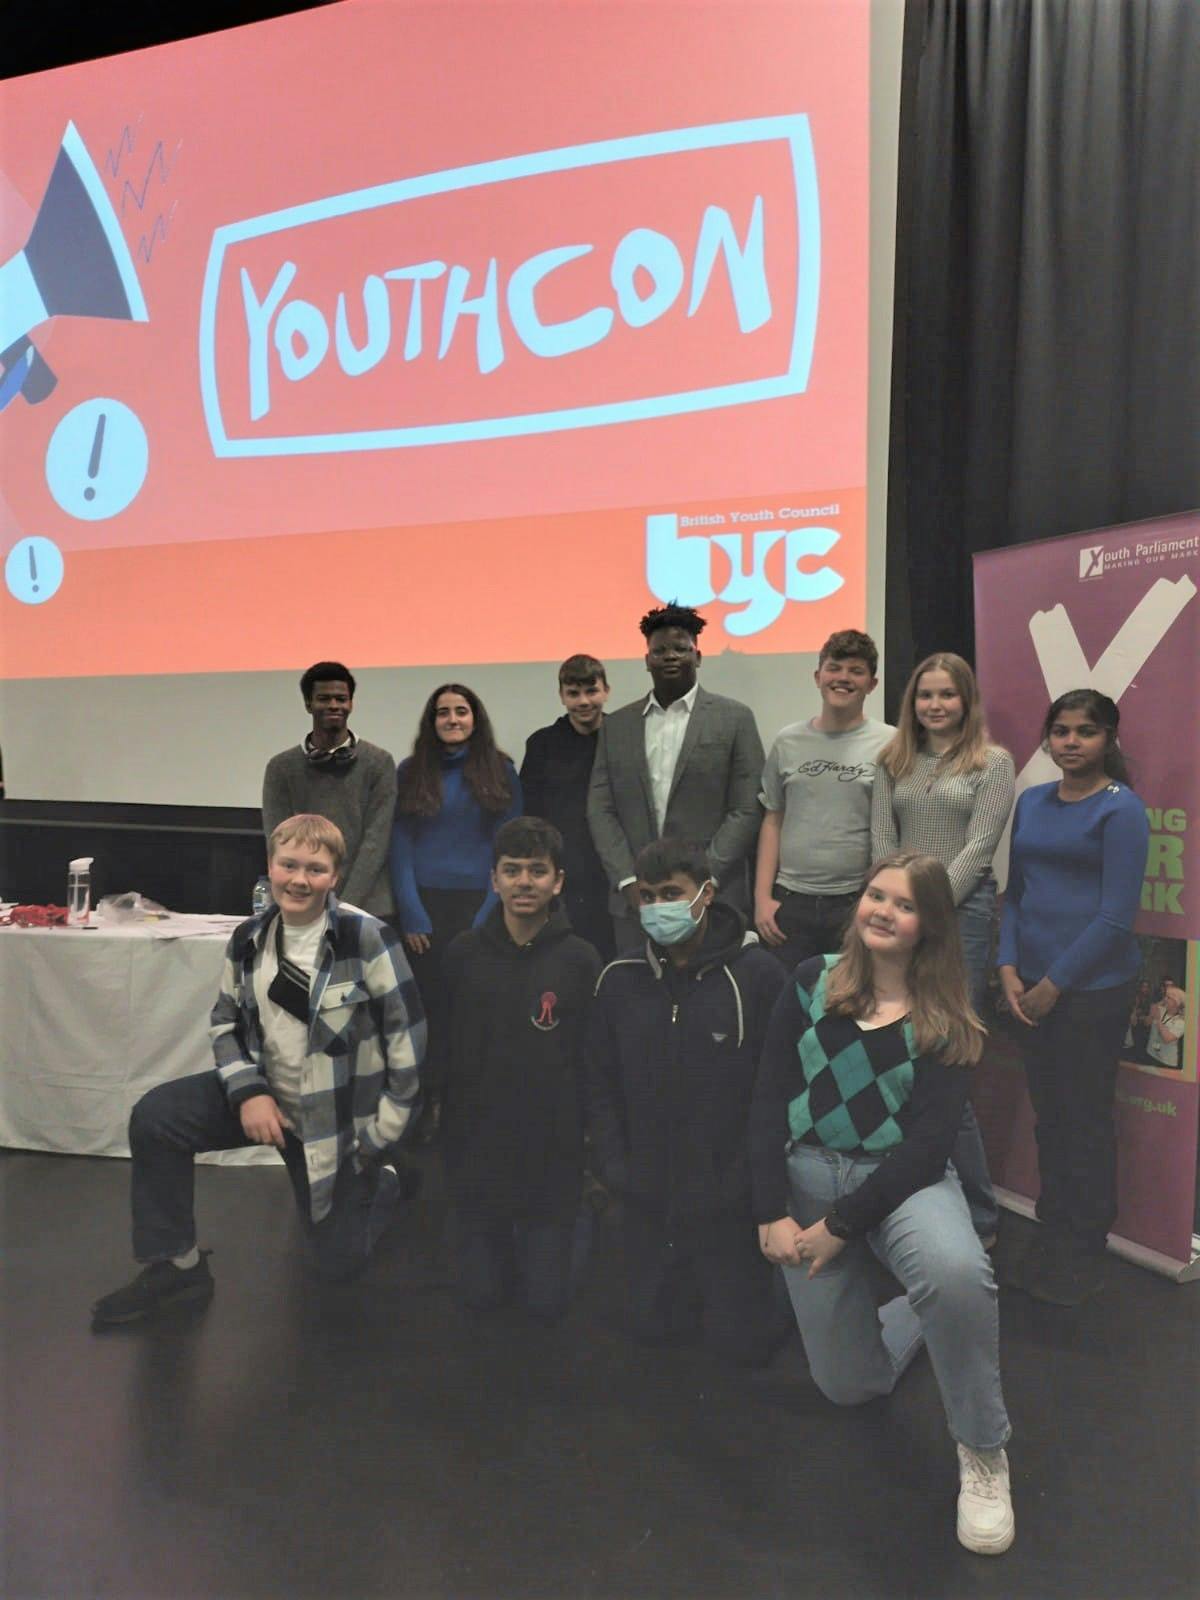 British Youth Council YouthCon Event February 2023